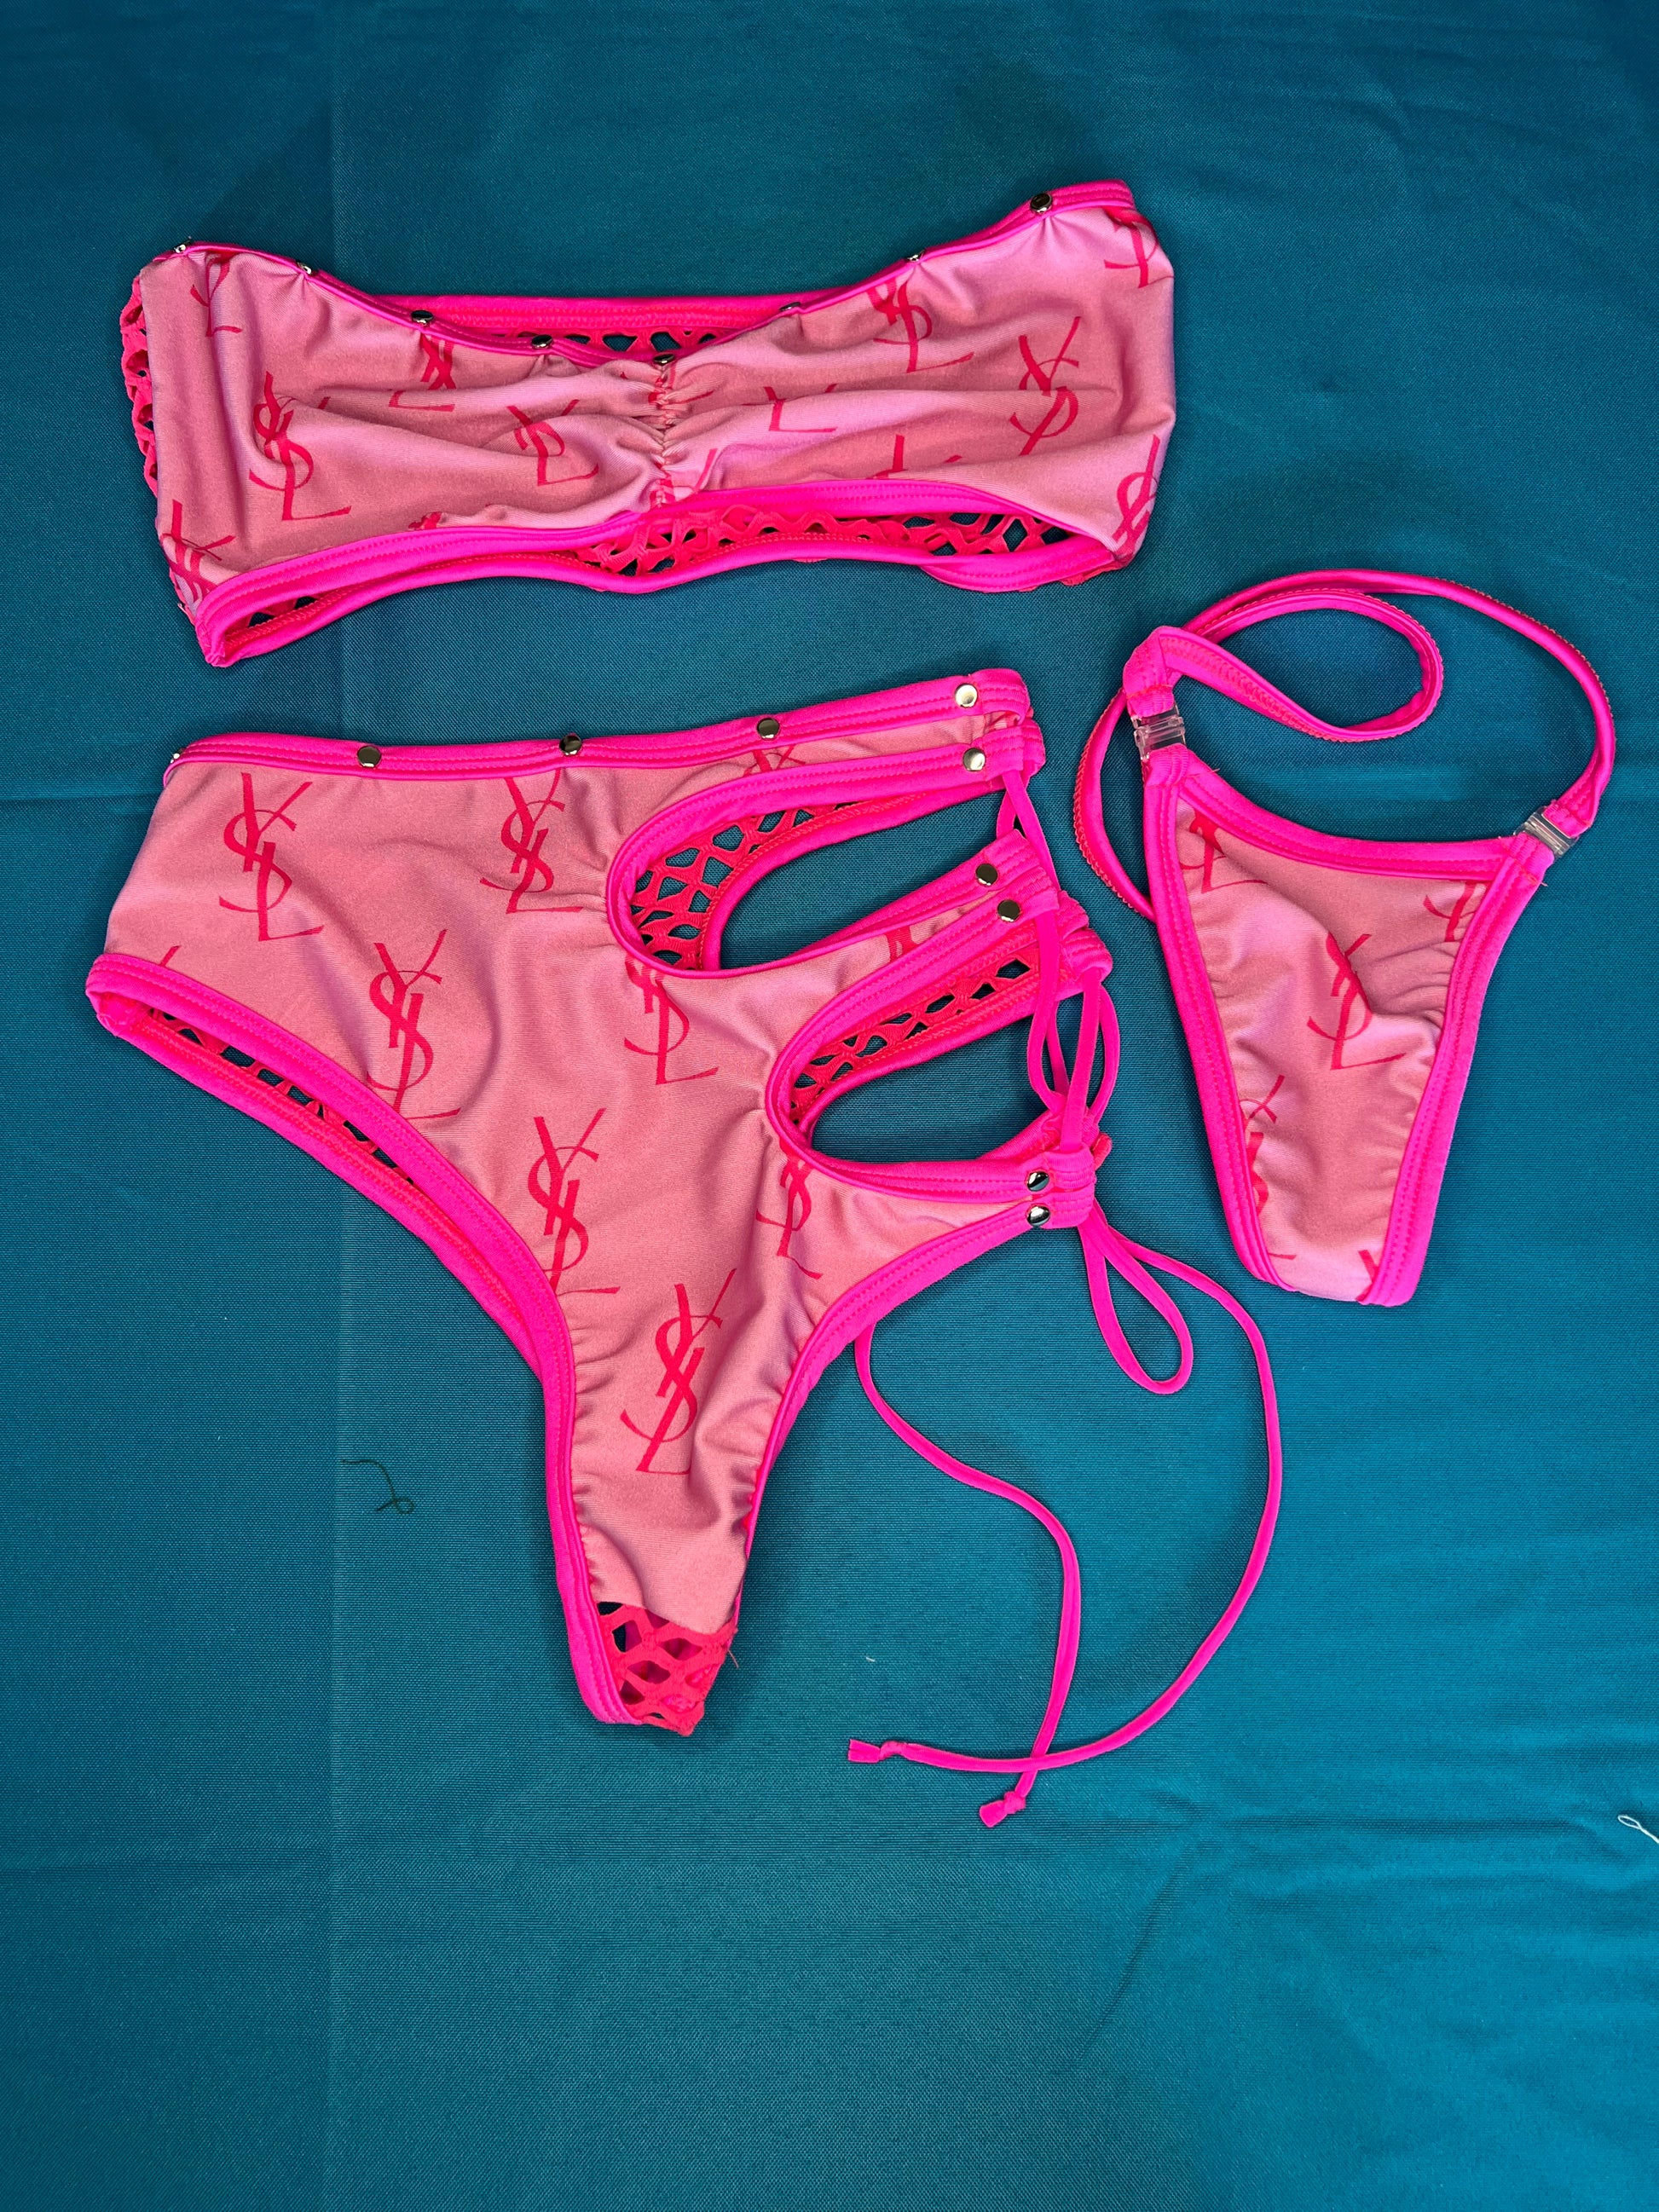 Two-Piece Hot Pink/Baby Pink Exotic Dance Wear Outfit Thong Set